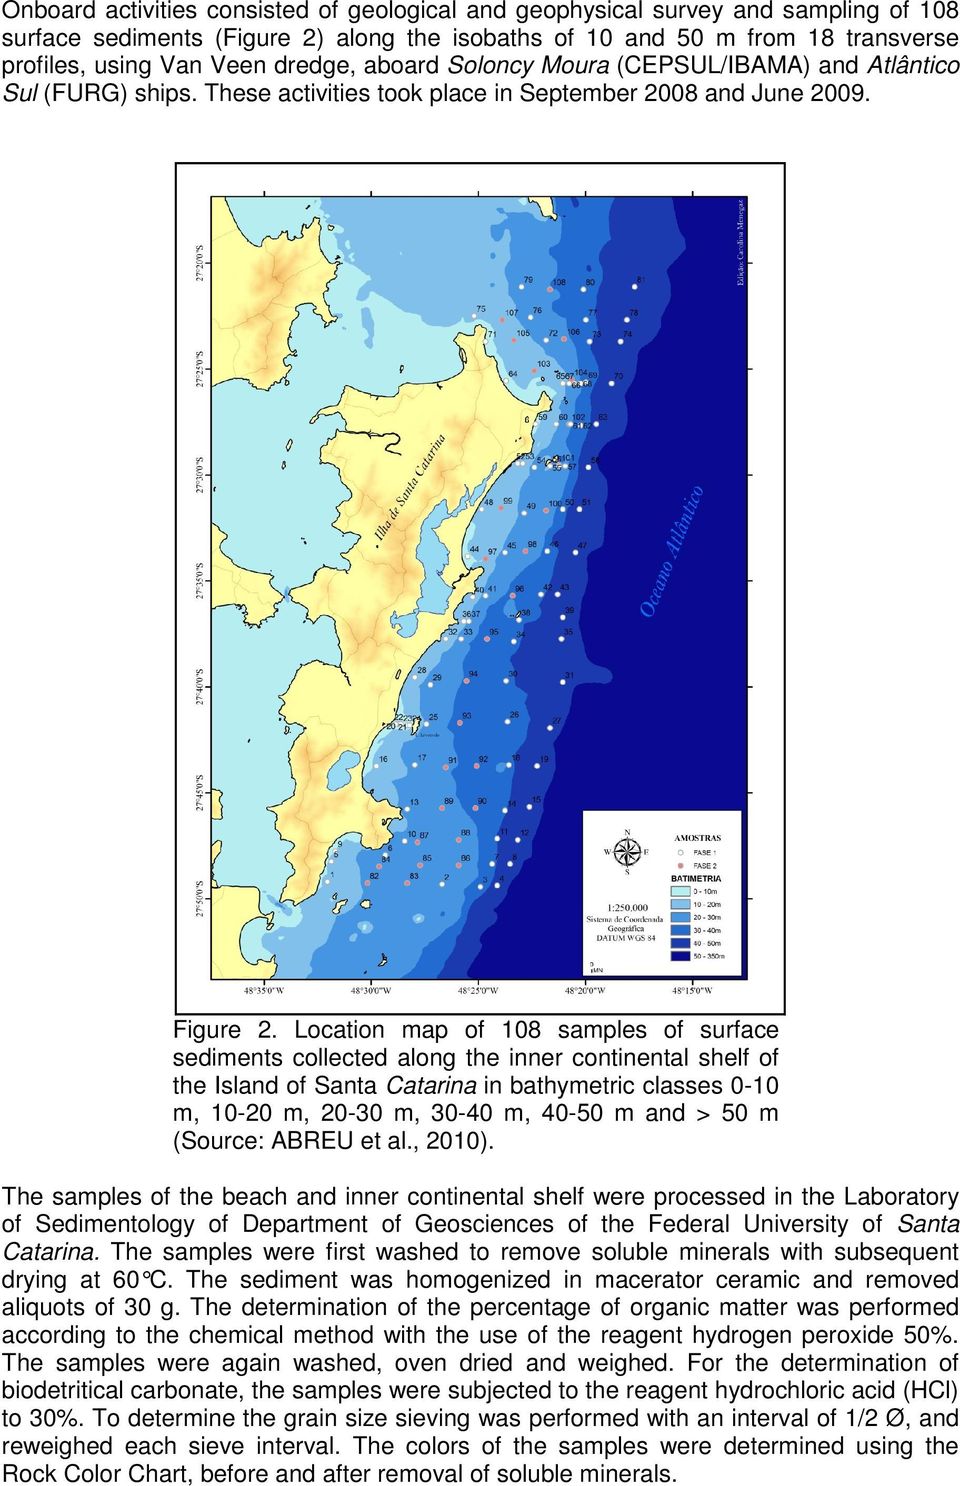 Location map of 108 samples of surface sediments collected along the inner continental shelf of the Island of Santa Catarina in bathymetric classes 0-10 m, 10-20 m, 20-30 m, 30-40 m, 40-50 m and > 50